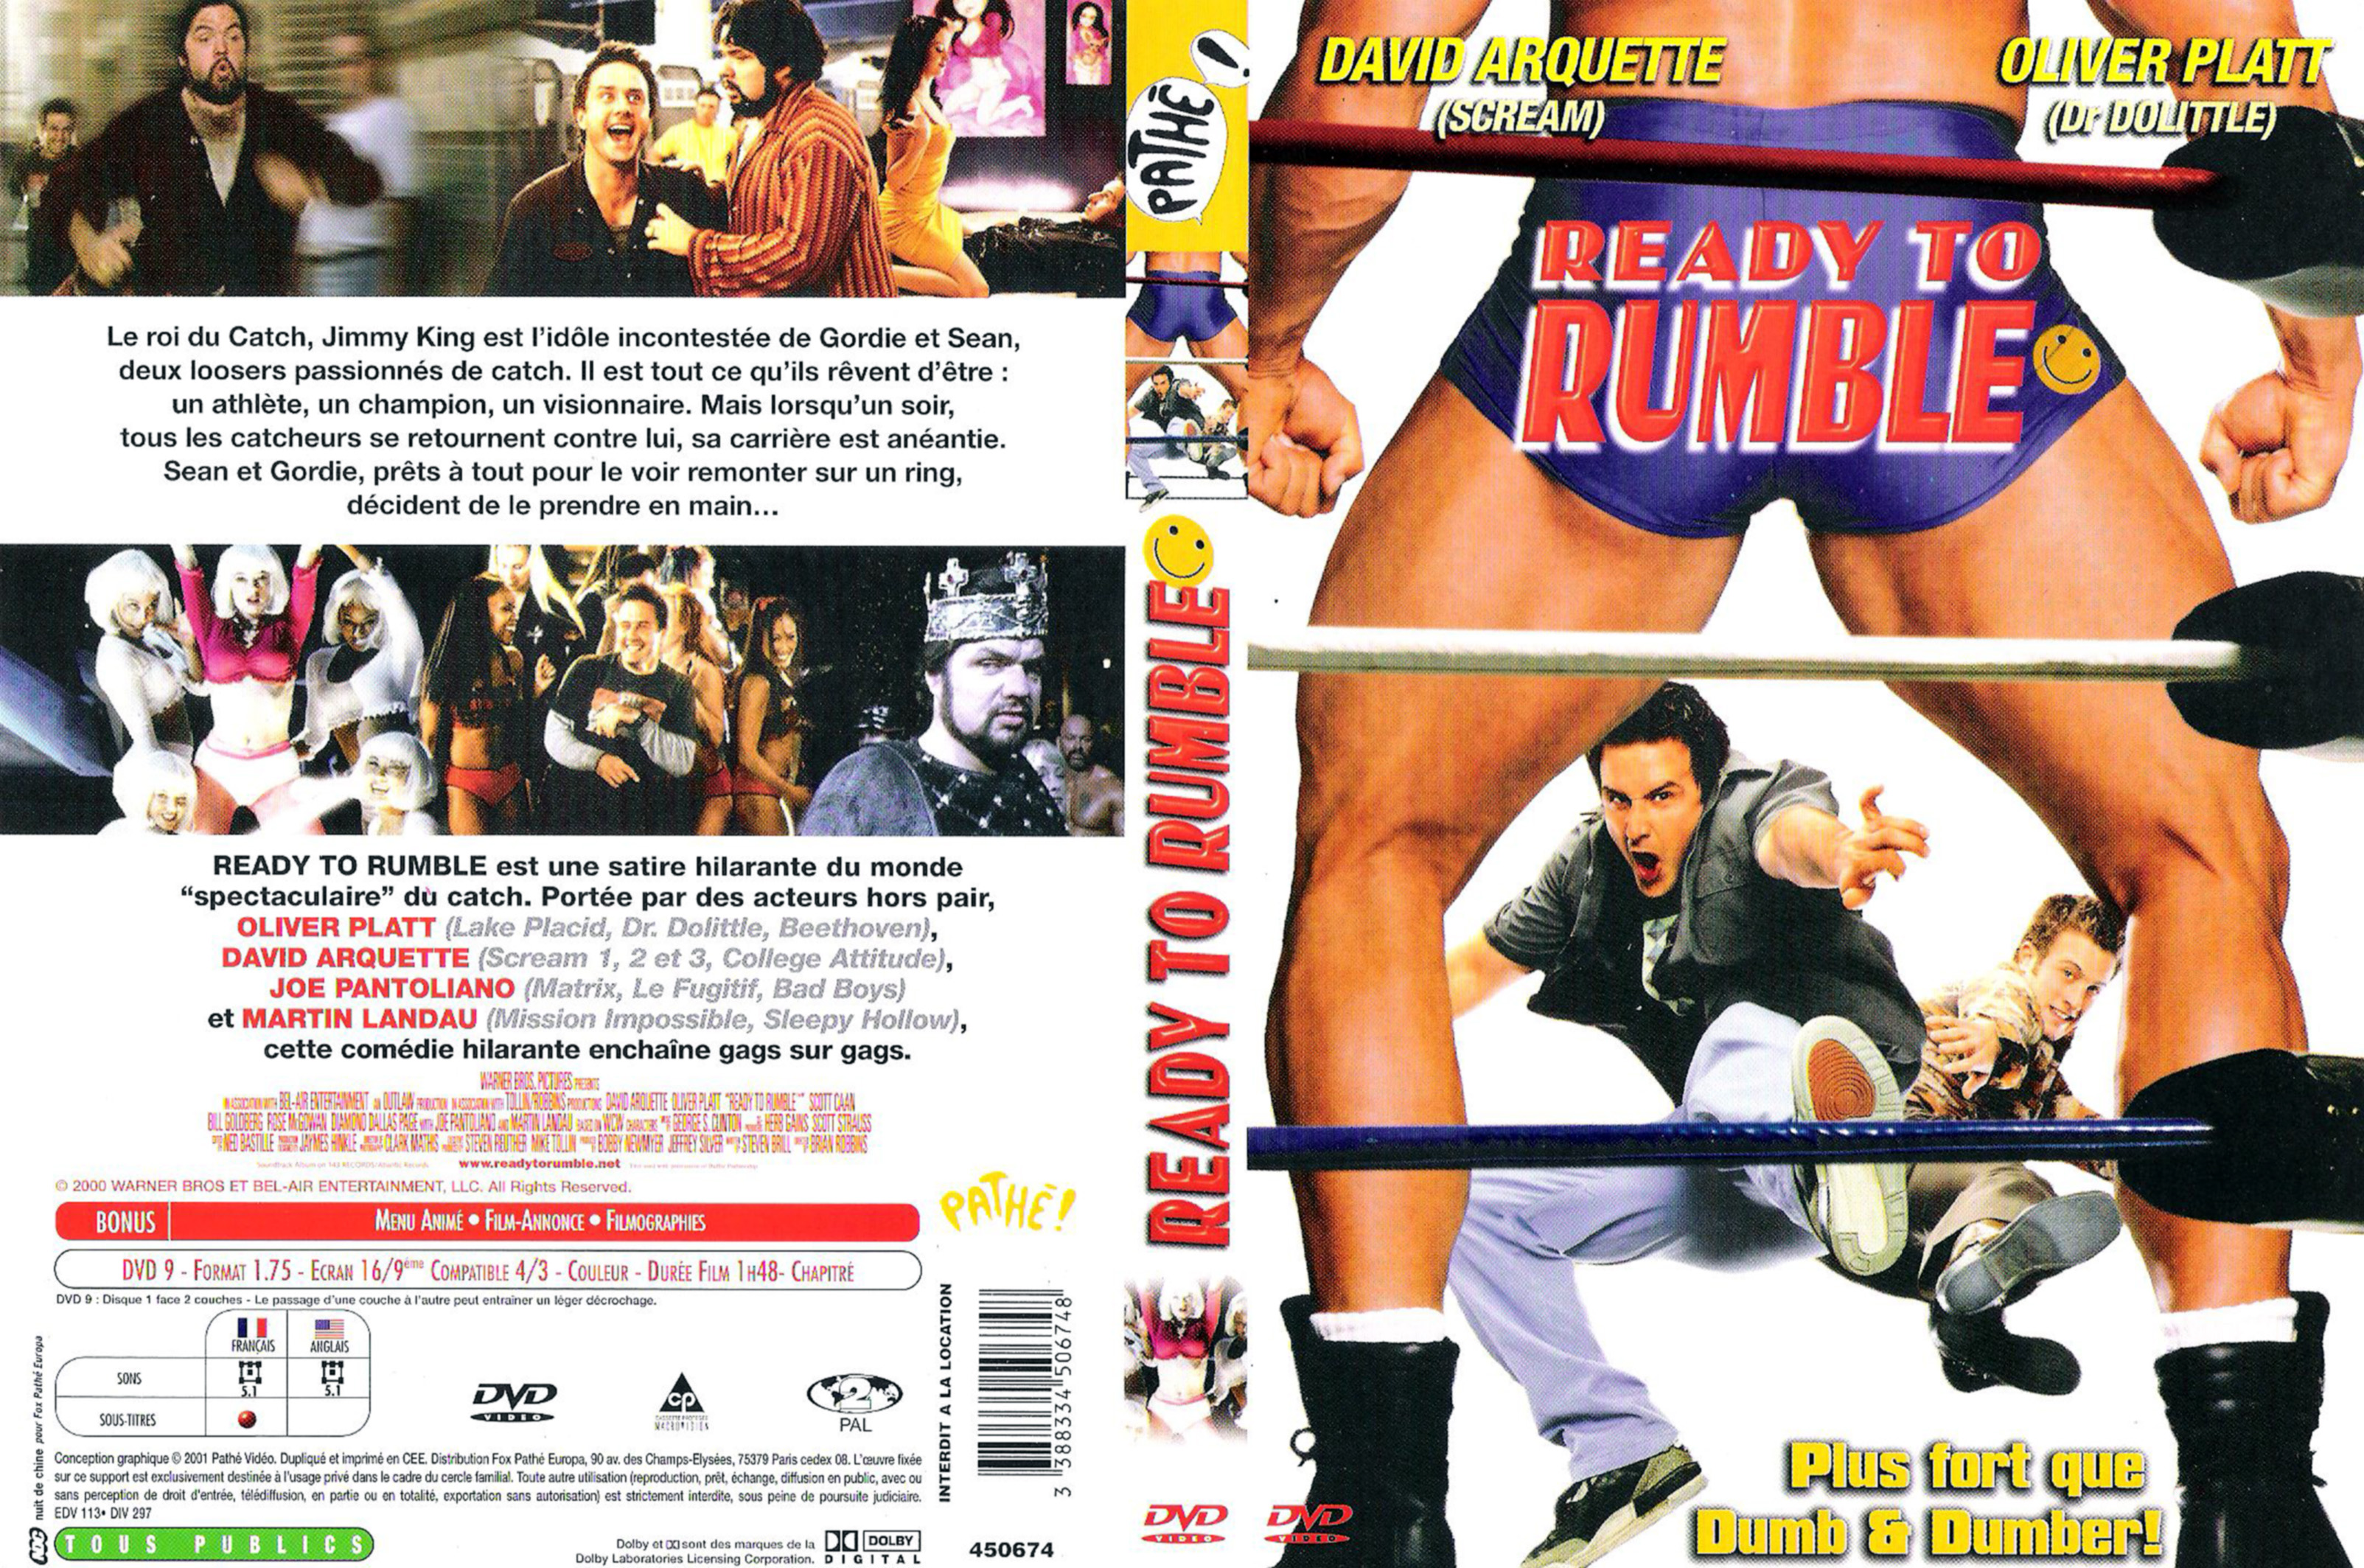 Jaquette DVD Ready to rumble